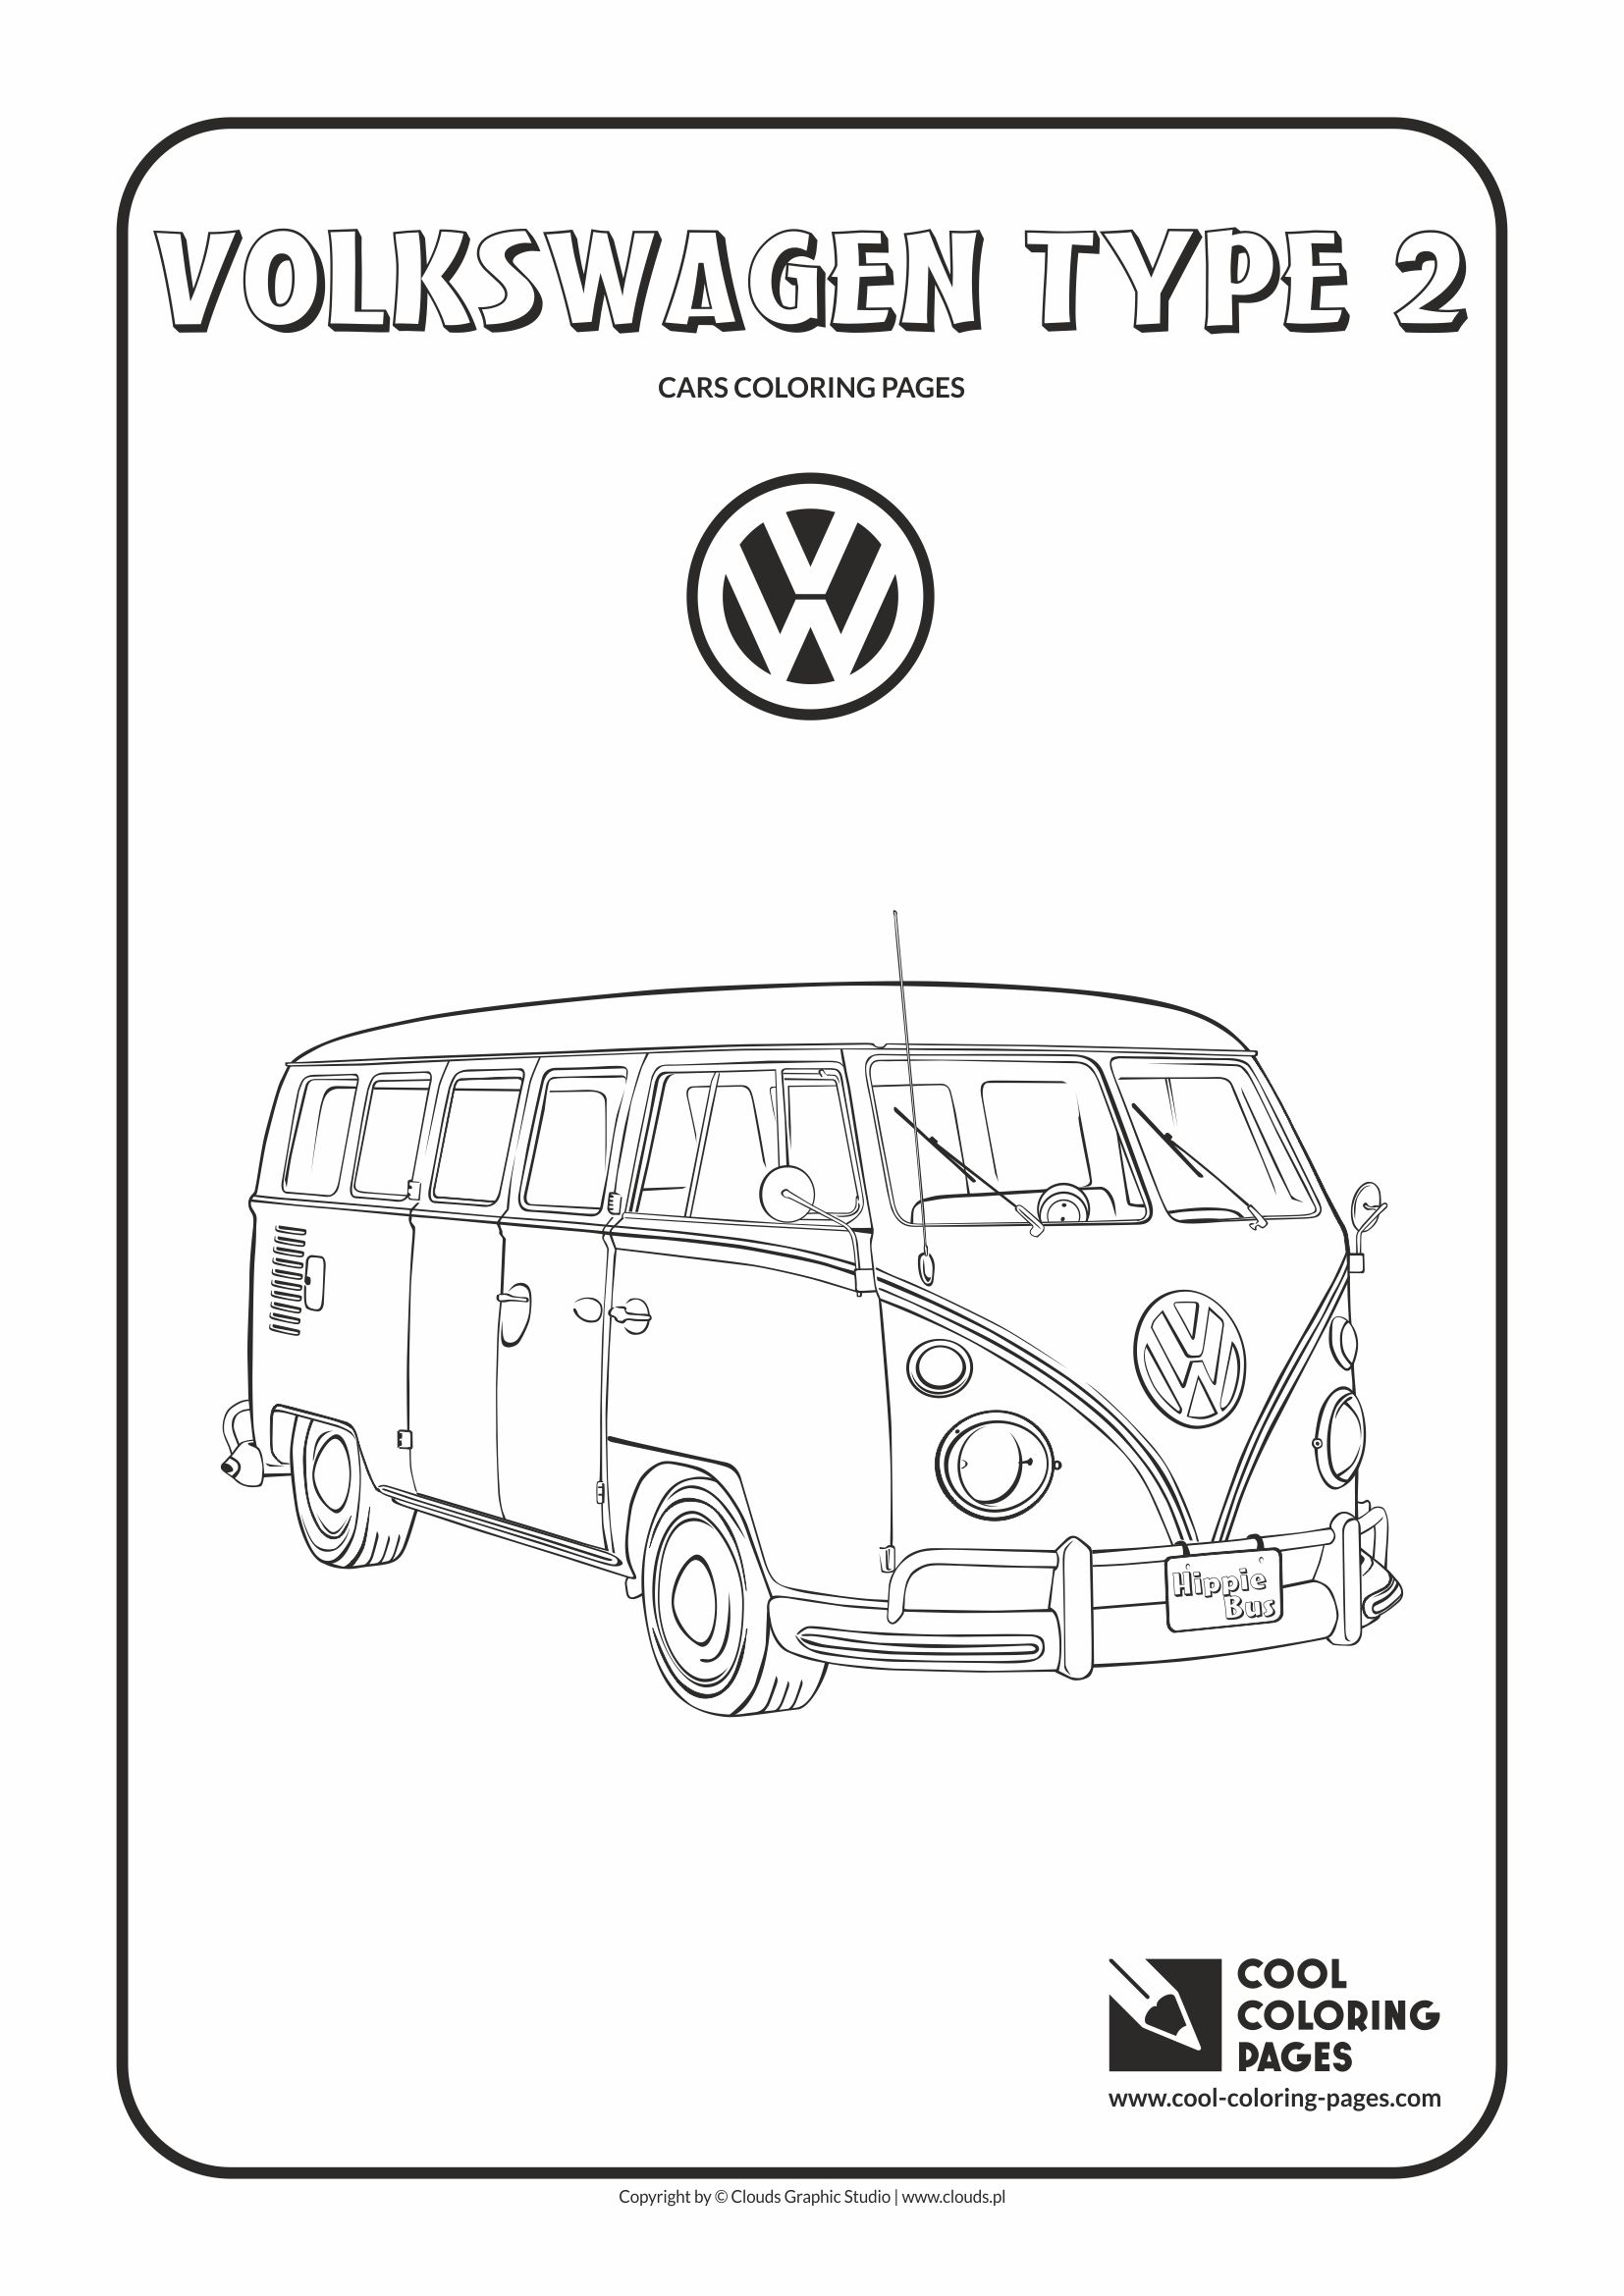 Download Cool Coloring Pages Vehicles coloring pages - Cool Coloring Pages | Free educational coloring ...